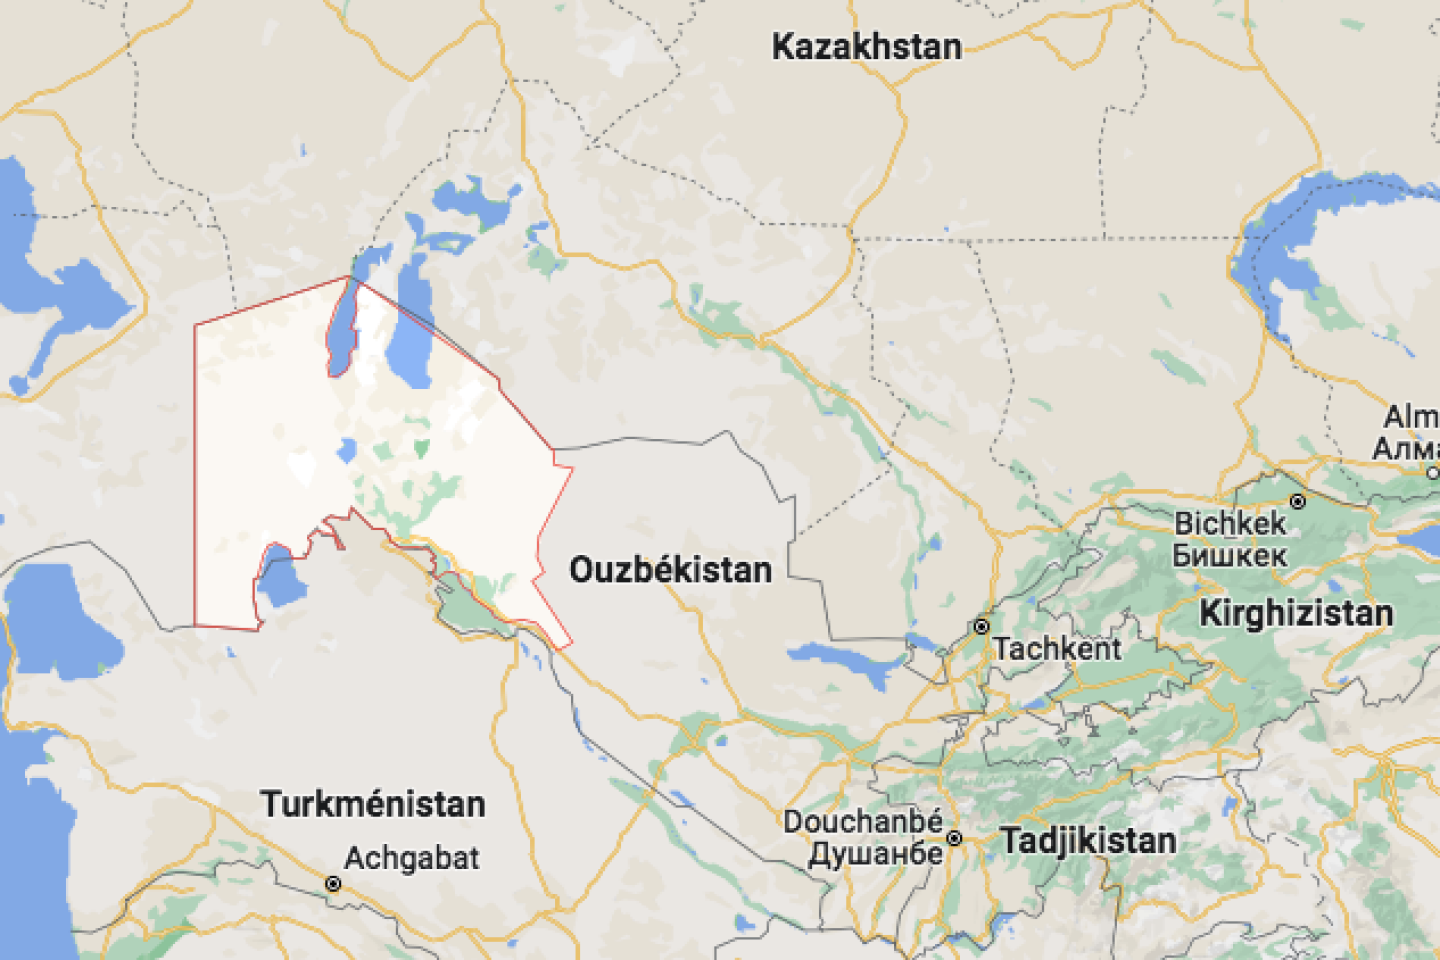 In Uzbekistan, the president stepped down after a rare anti-government demonstration